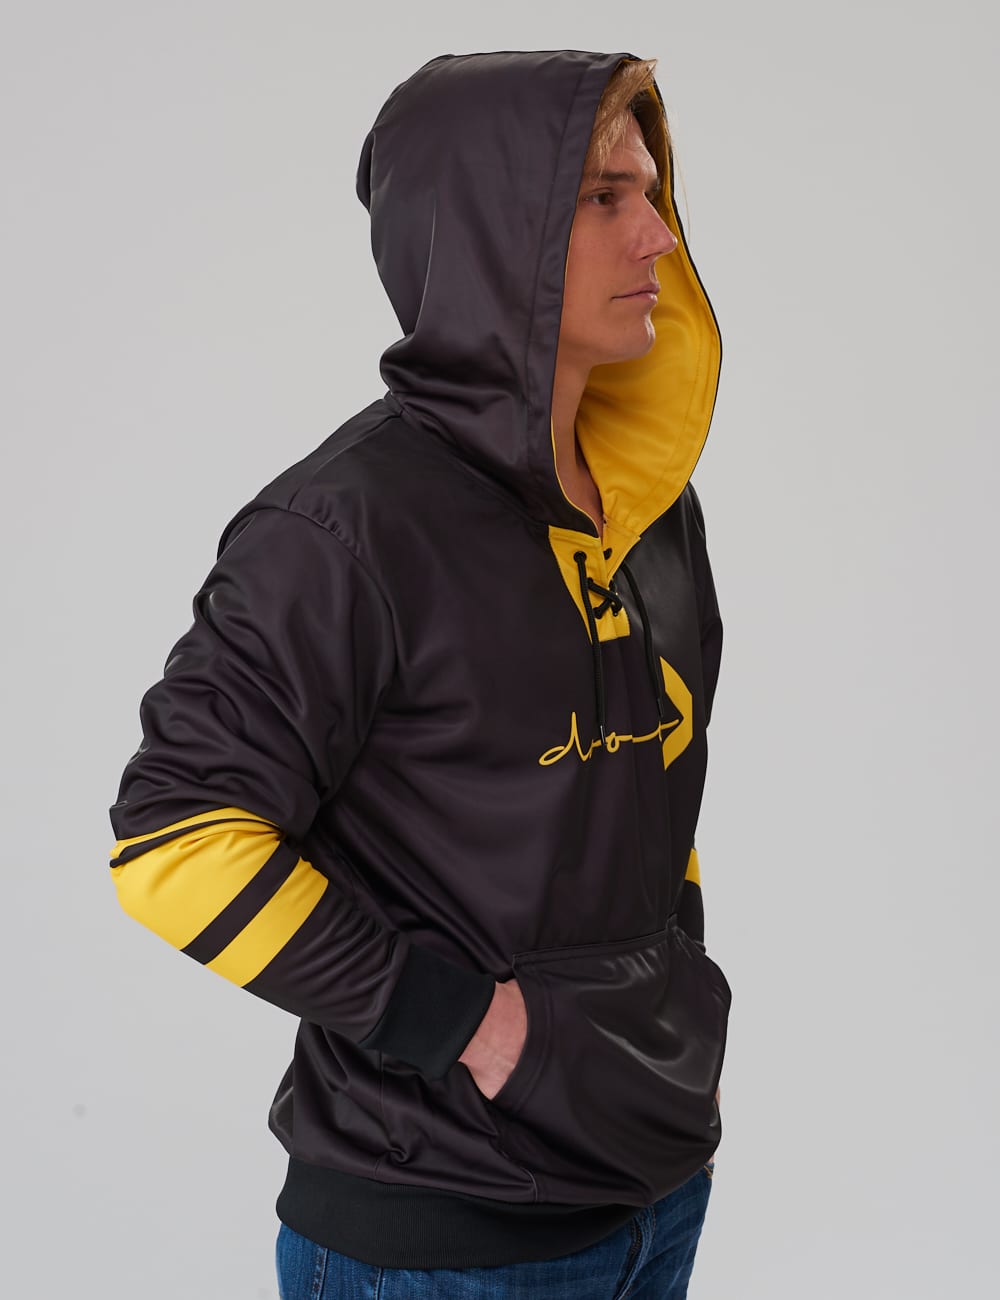 model wearing a black lace-up hoodie with yellow stripes